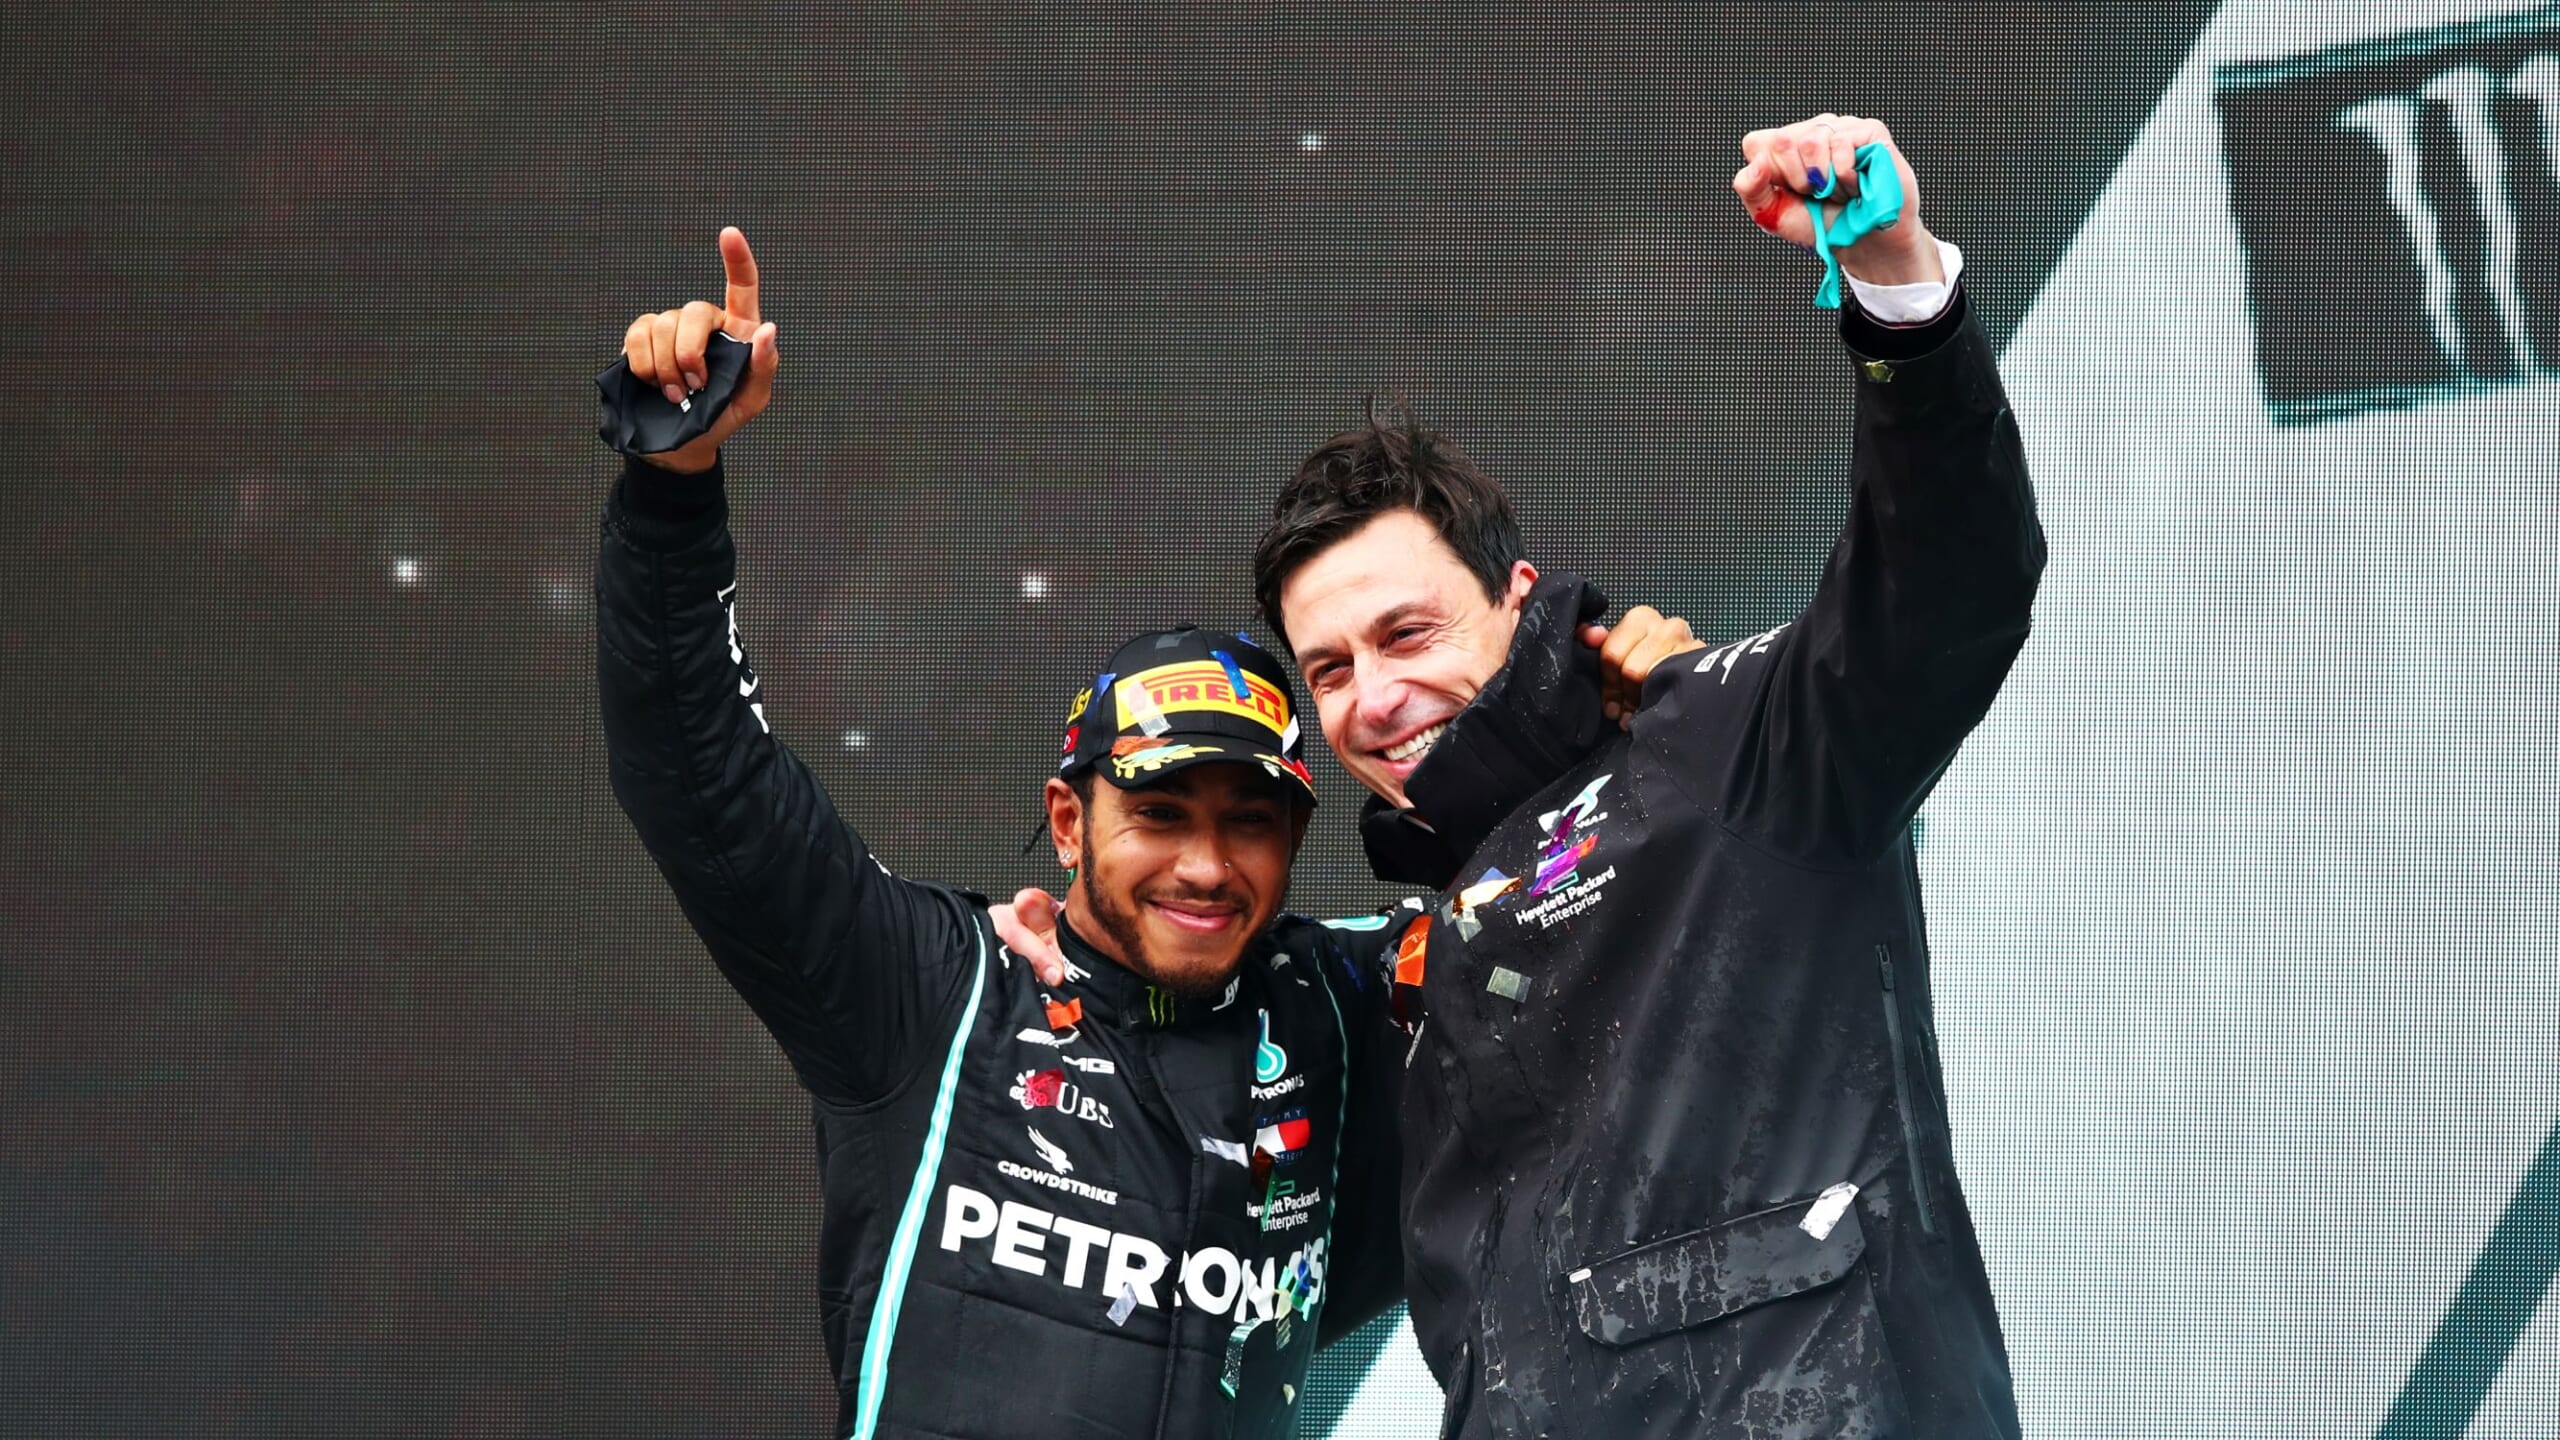 F1 Boss Toto Wolff Talks Lewis Hamilton, Niki Lauda and His Obsession With Winning